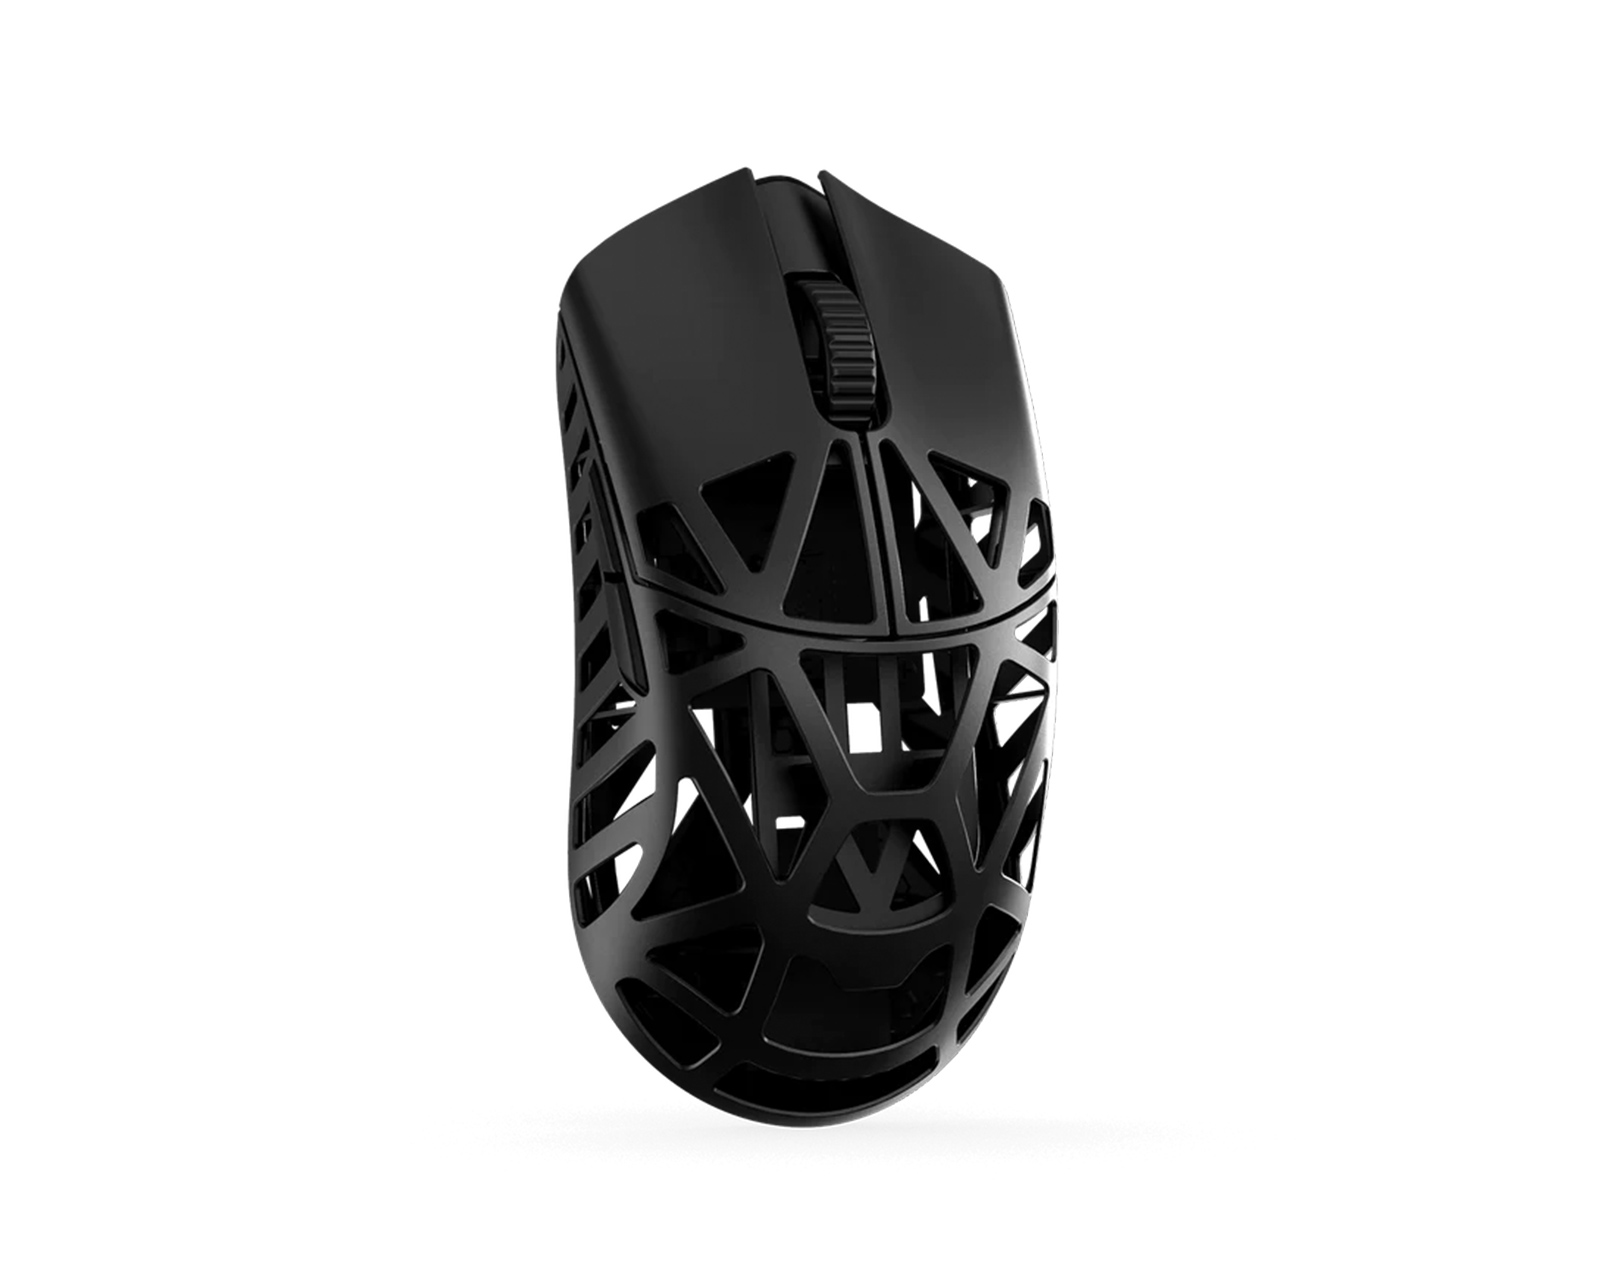 WLMouse BEAST X Wireless Gaming Mouse - Black - us.MaxGaming.com